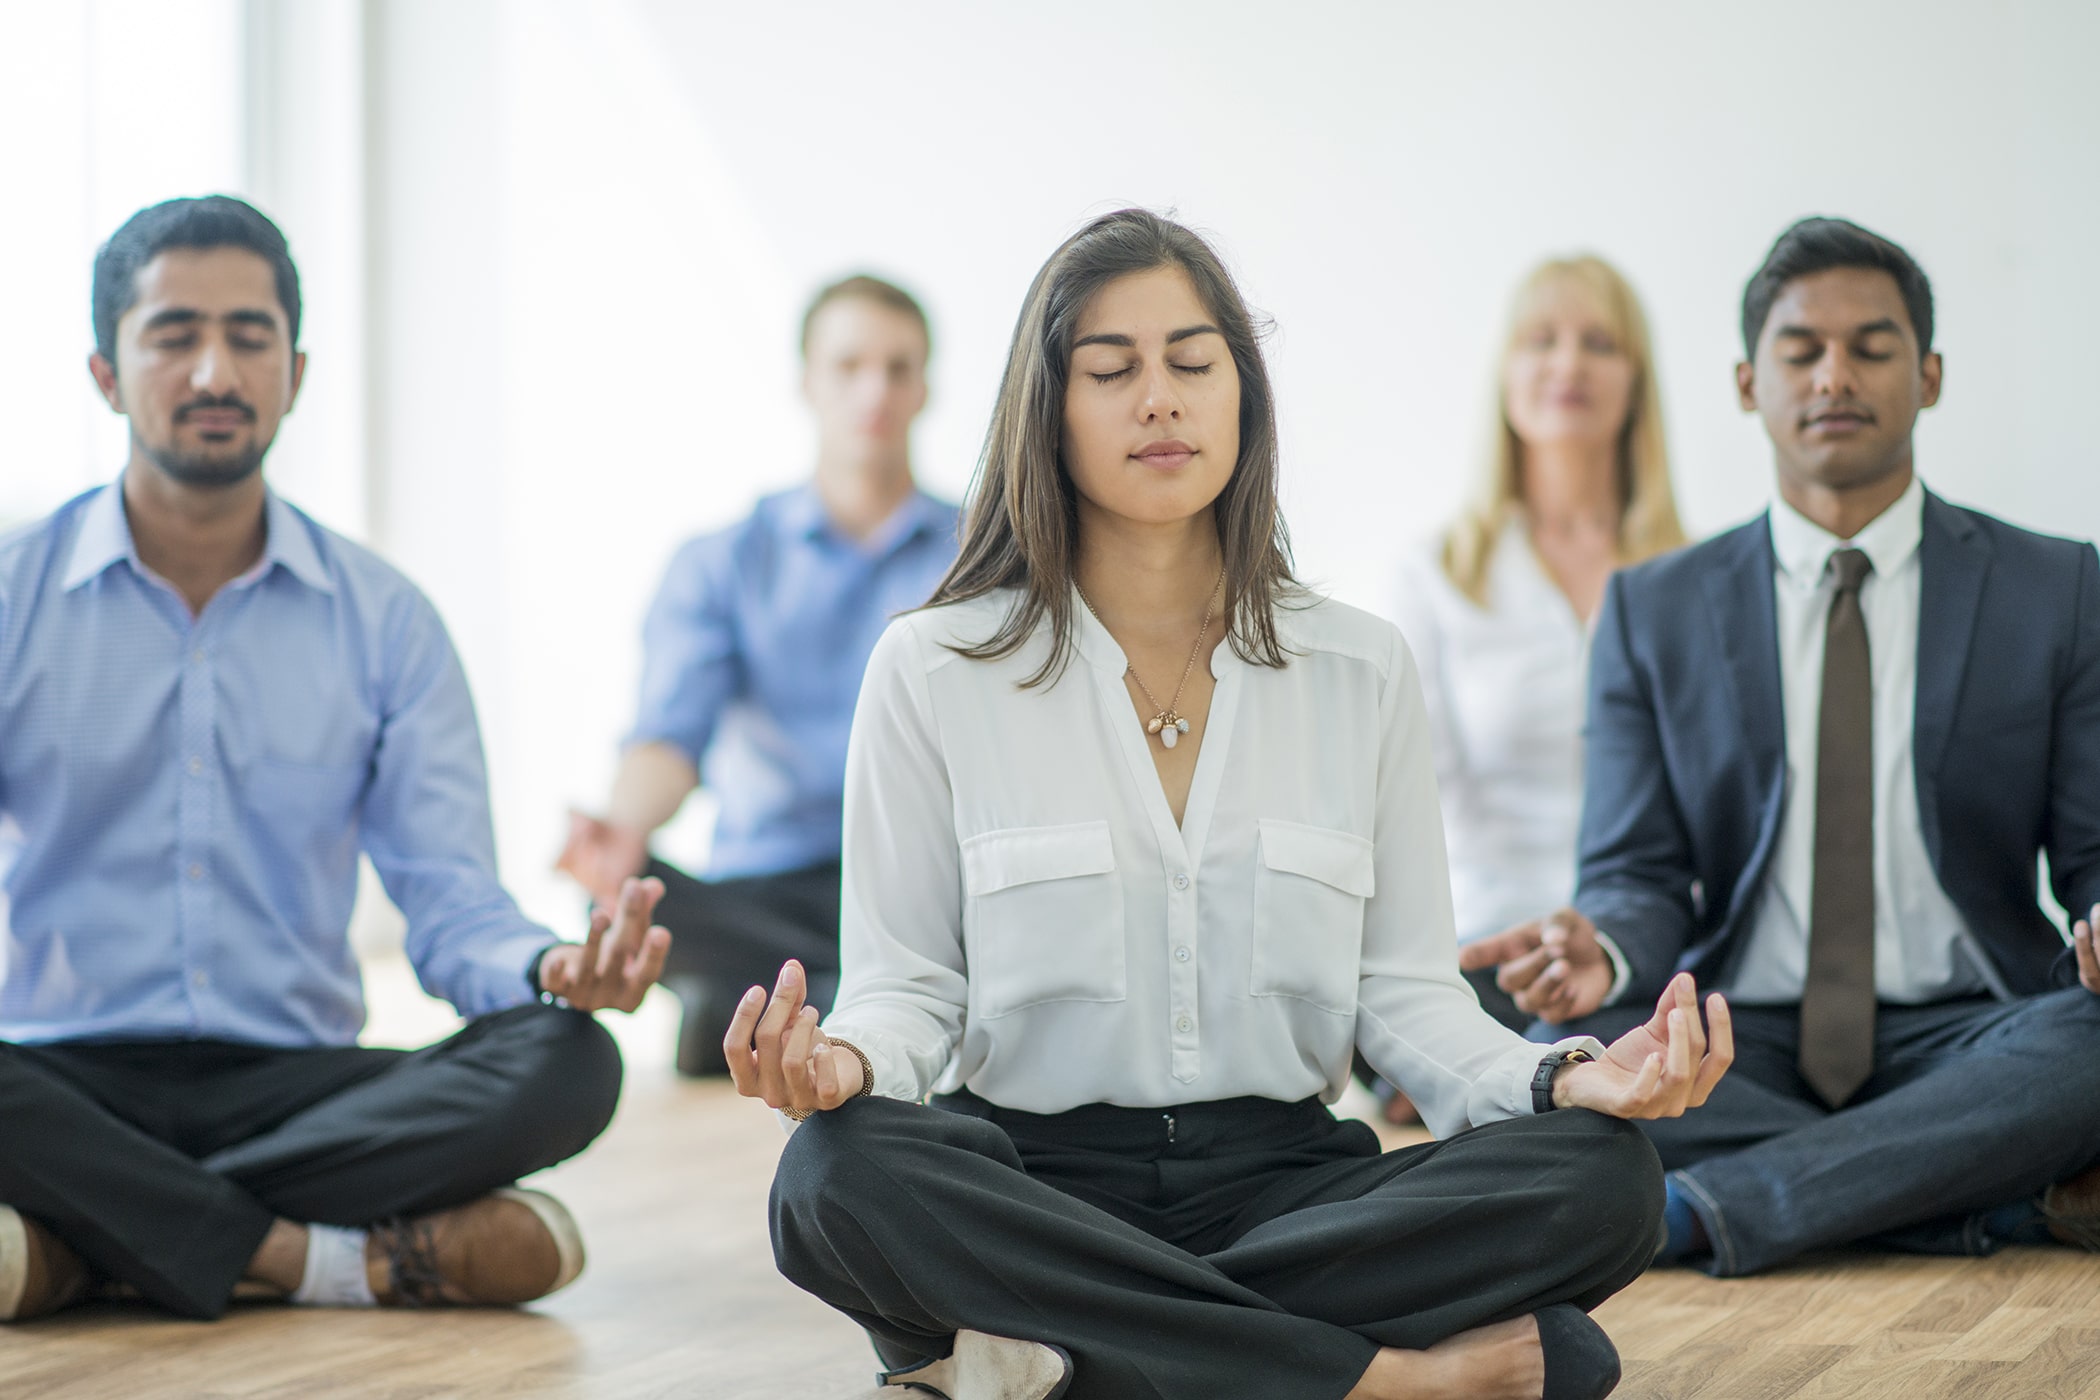 What Are the Benefits of a Corporate Wellness Program?